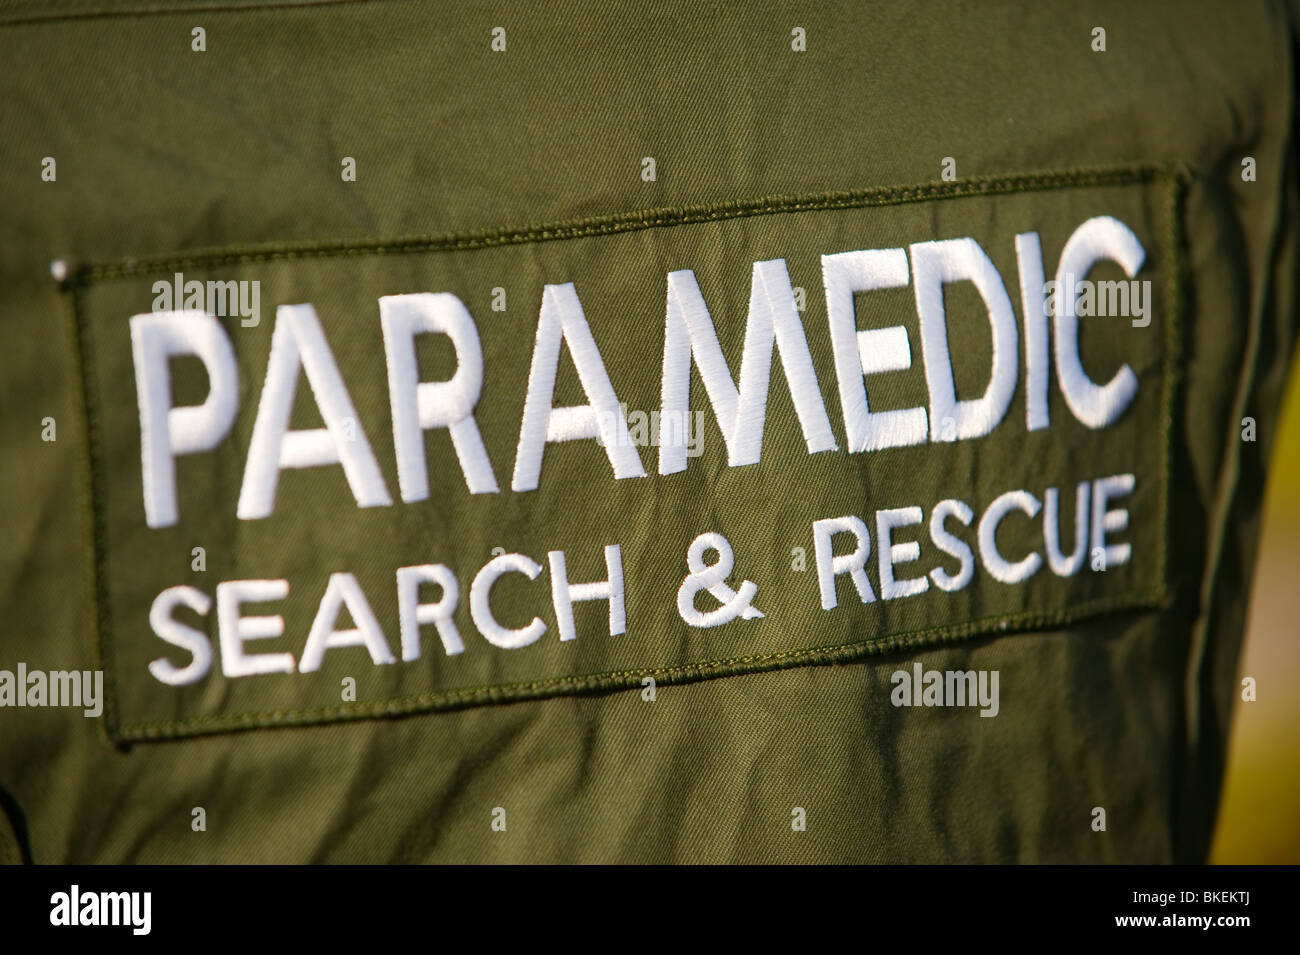 paramedic Search and Rescue Stock Photo